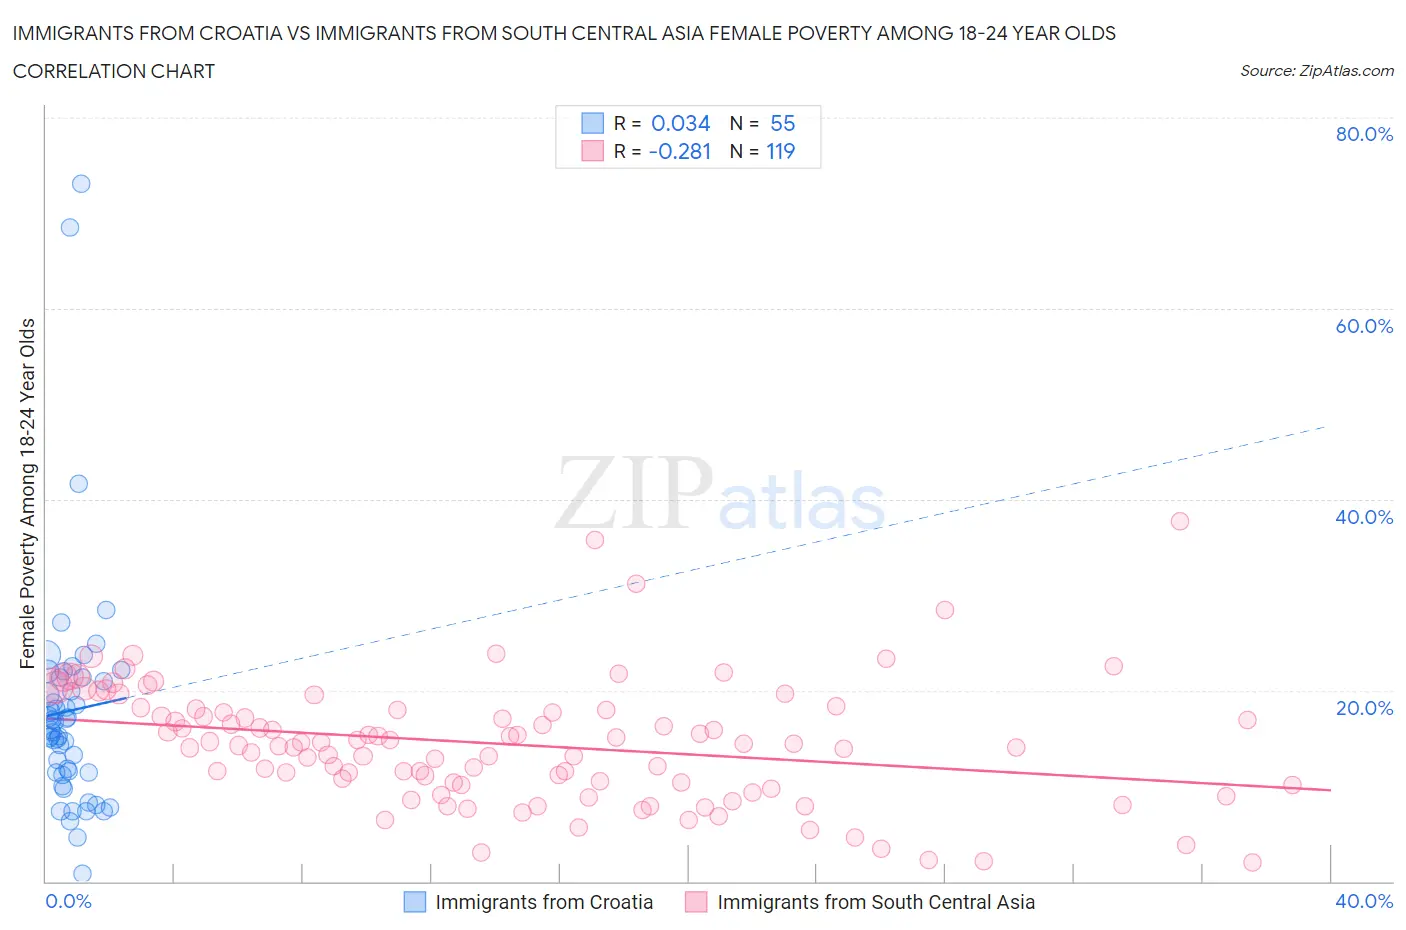 Immigrants from Croatia vs Immigrants from South Central Asia Female Poverty Among 18-24 Year Olds